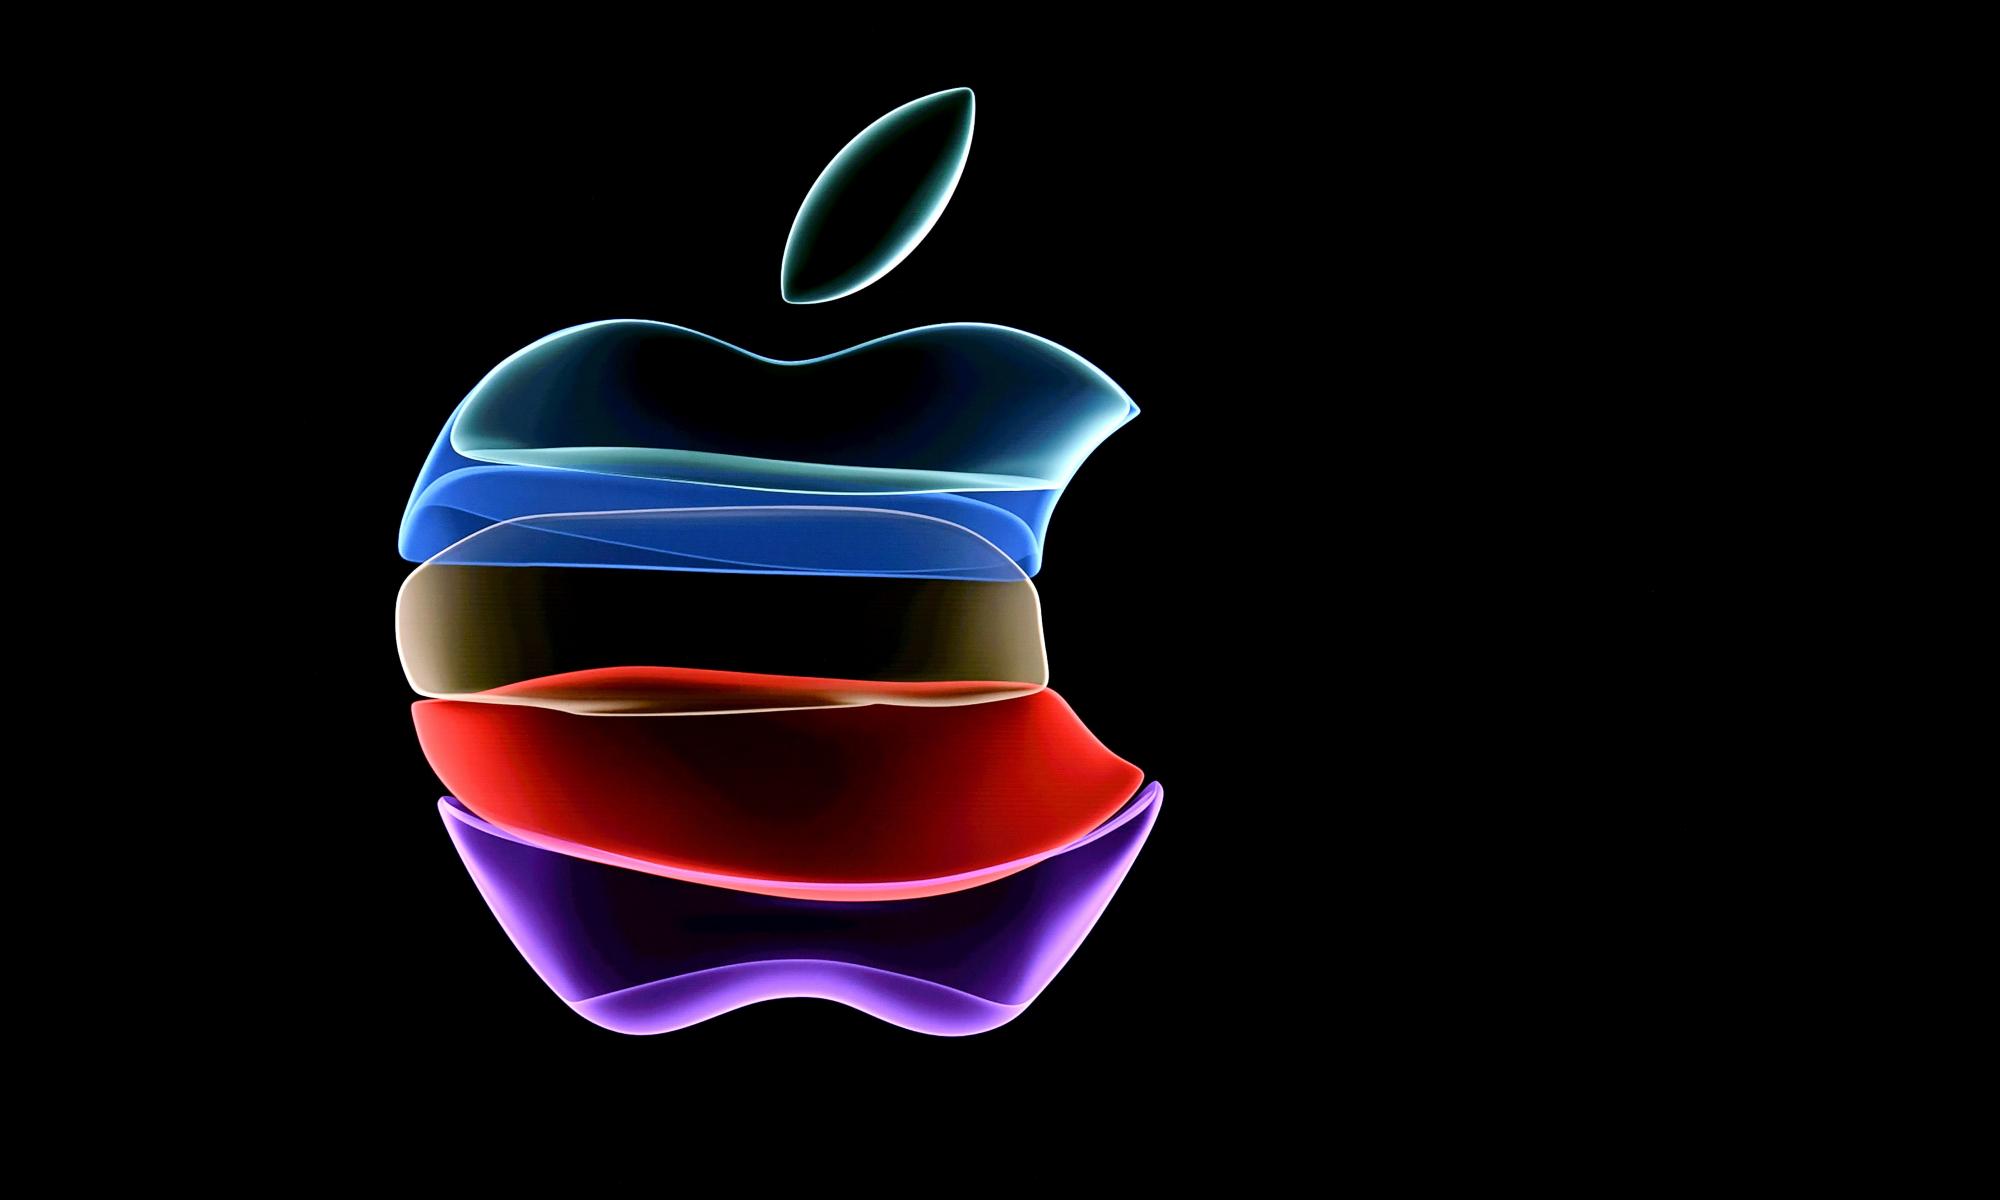 Apple promises to become fully carbon-neutral by 2030